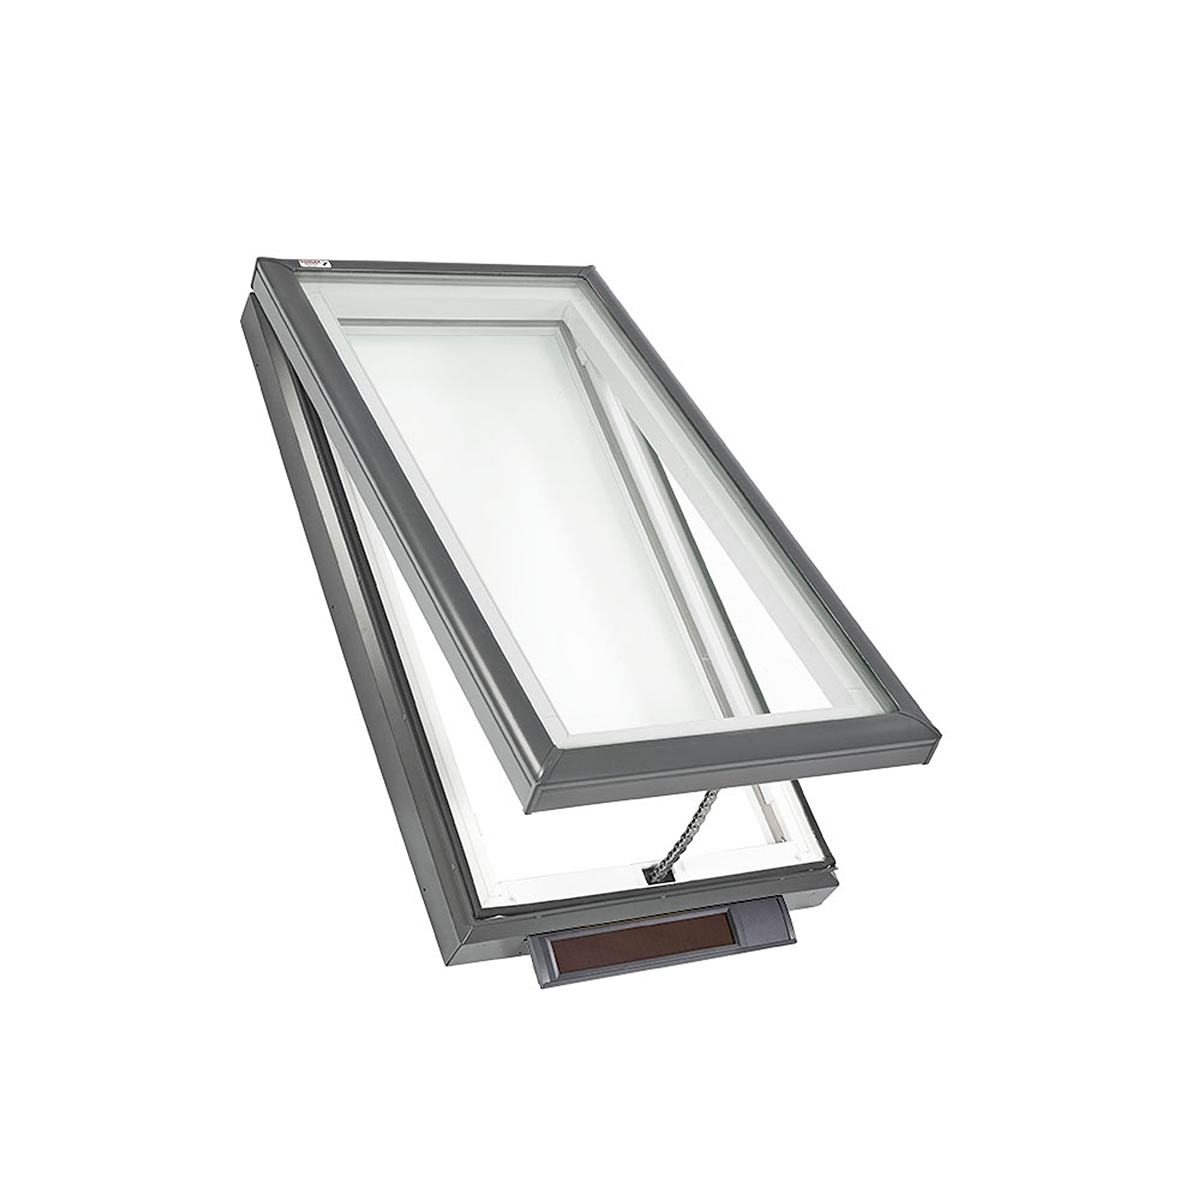 Solar Powered Curb-Mount Skylight with Laminated Low-E3 Glass - 34-1/2 in. x 34-1/2 in. - VCS 3434